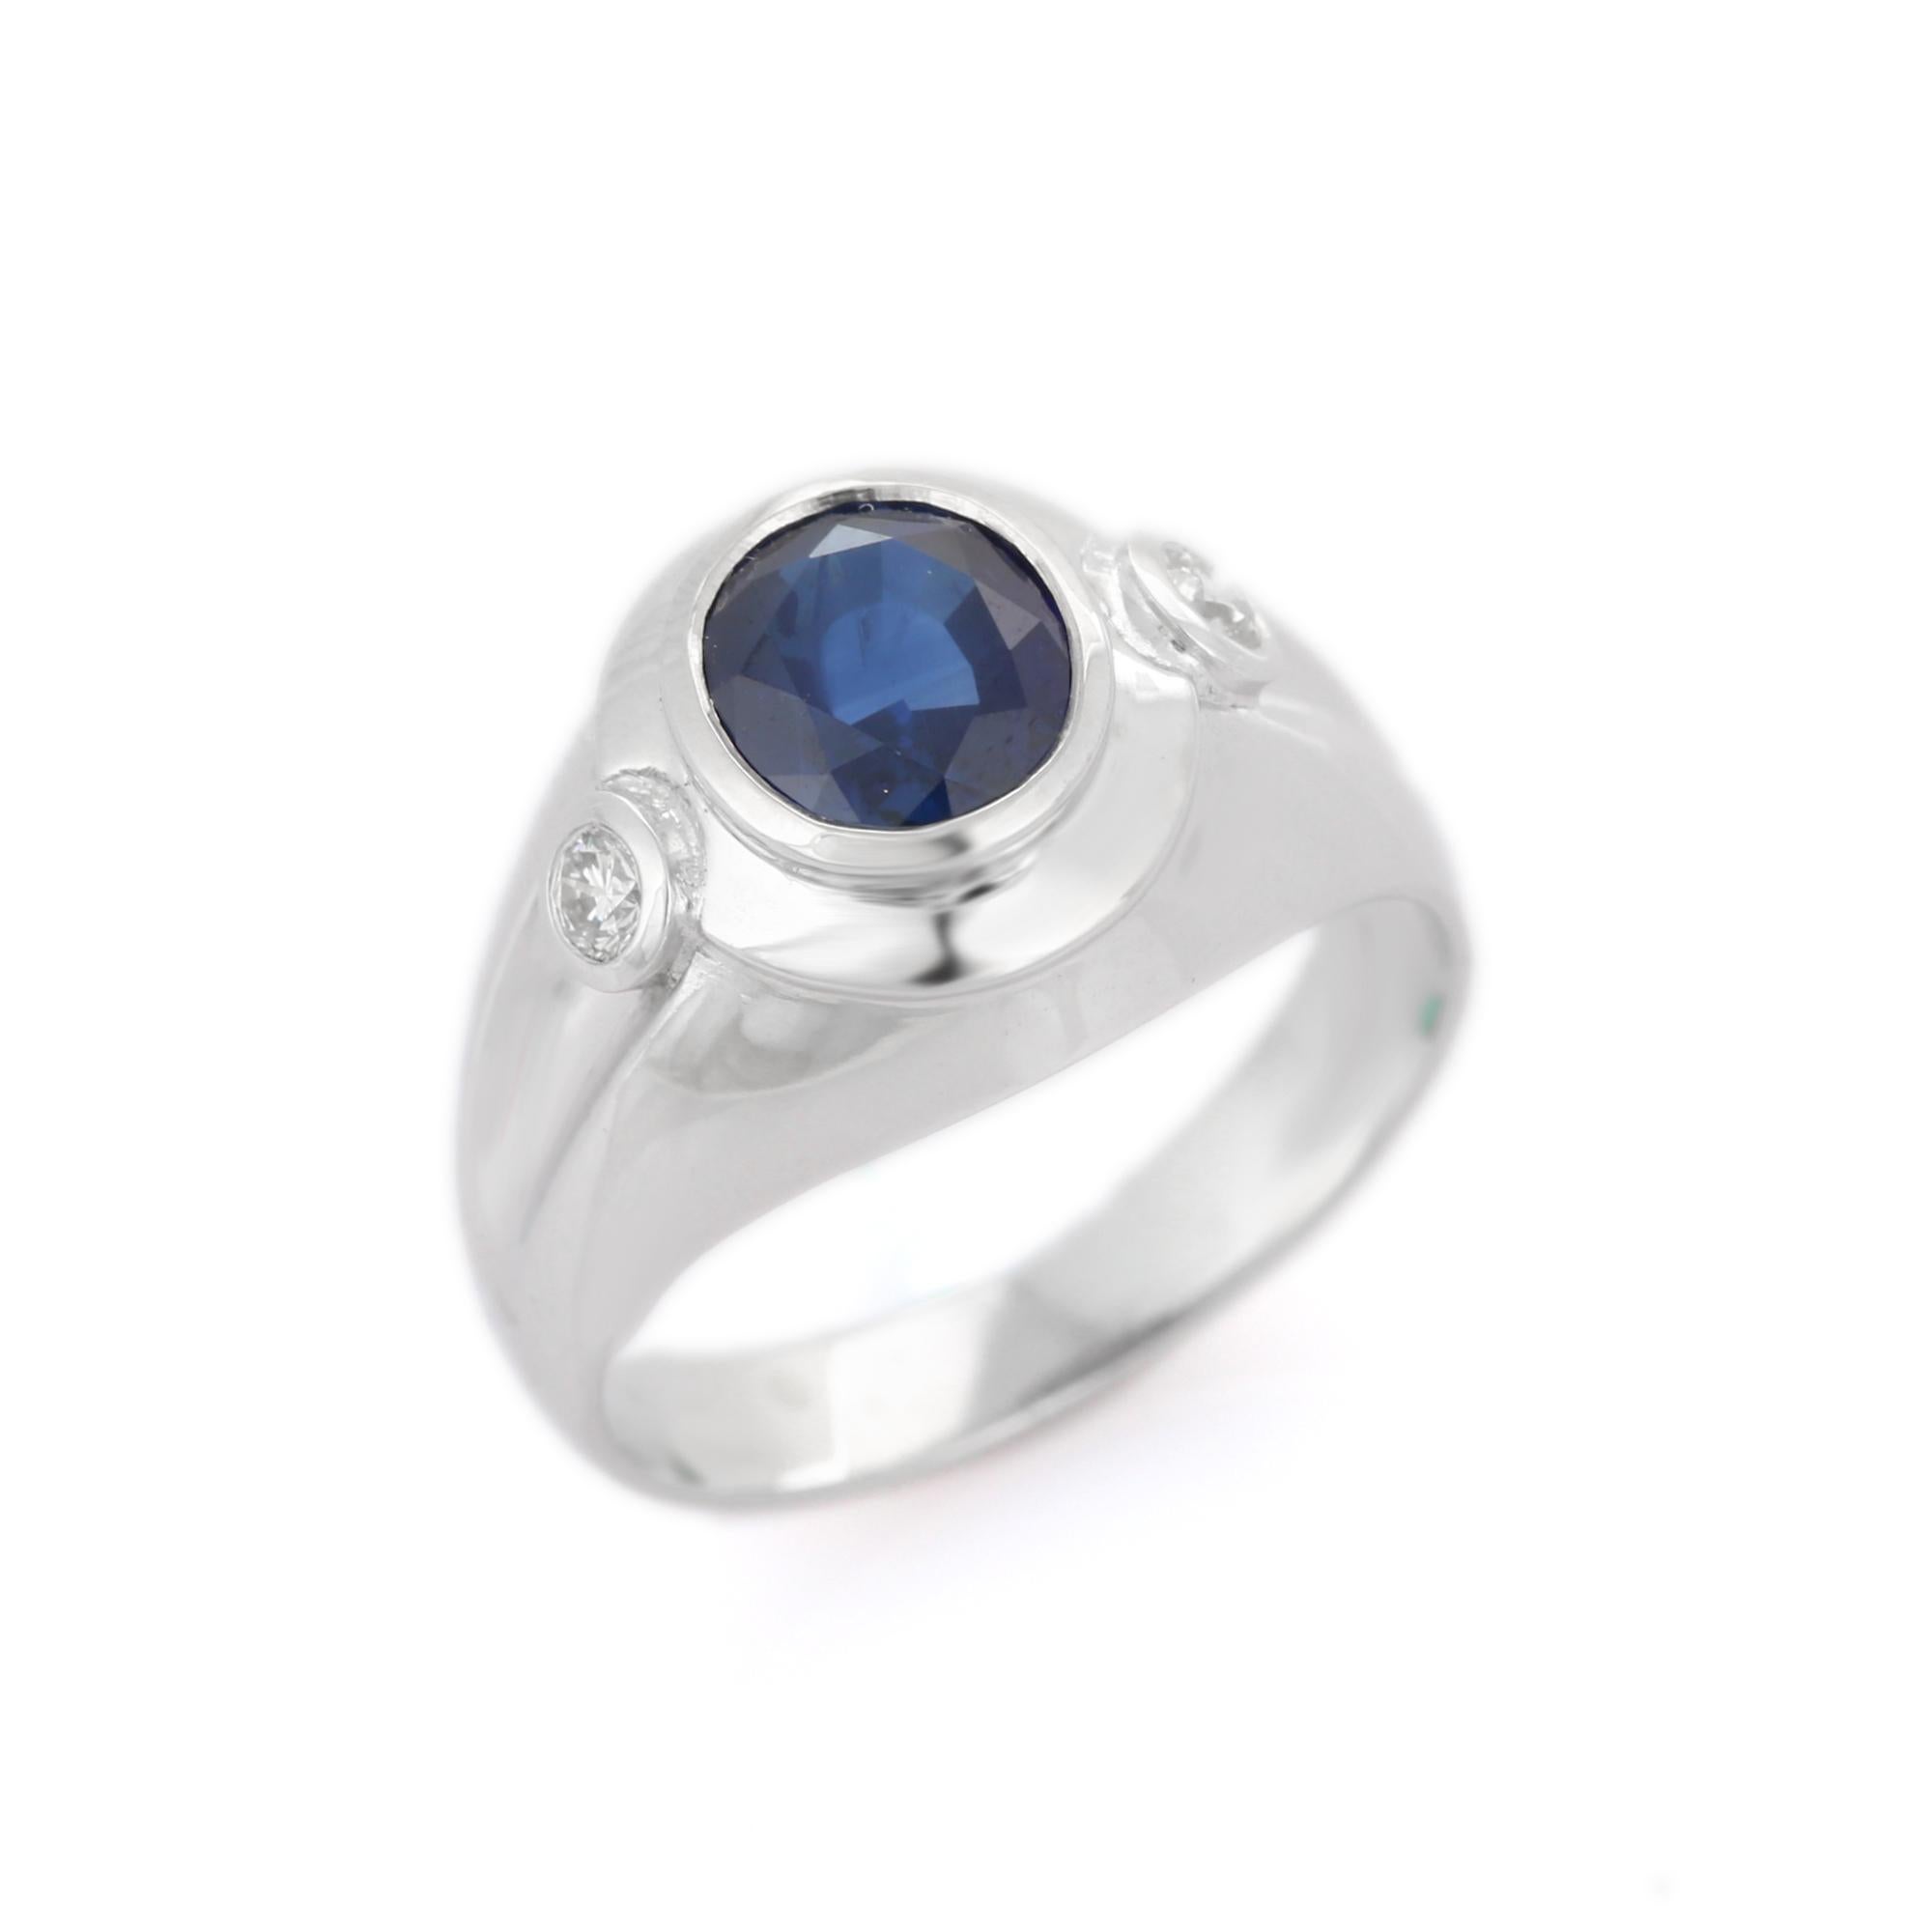 For Sale:  Blue Sapphire and Diamond Statement Wedding Ring for Men in 18k Solid White Gold 5